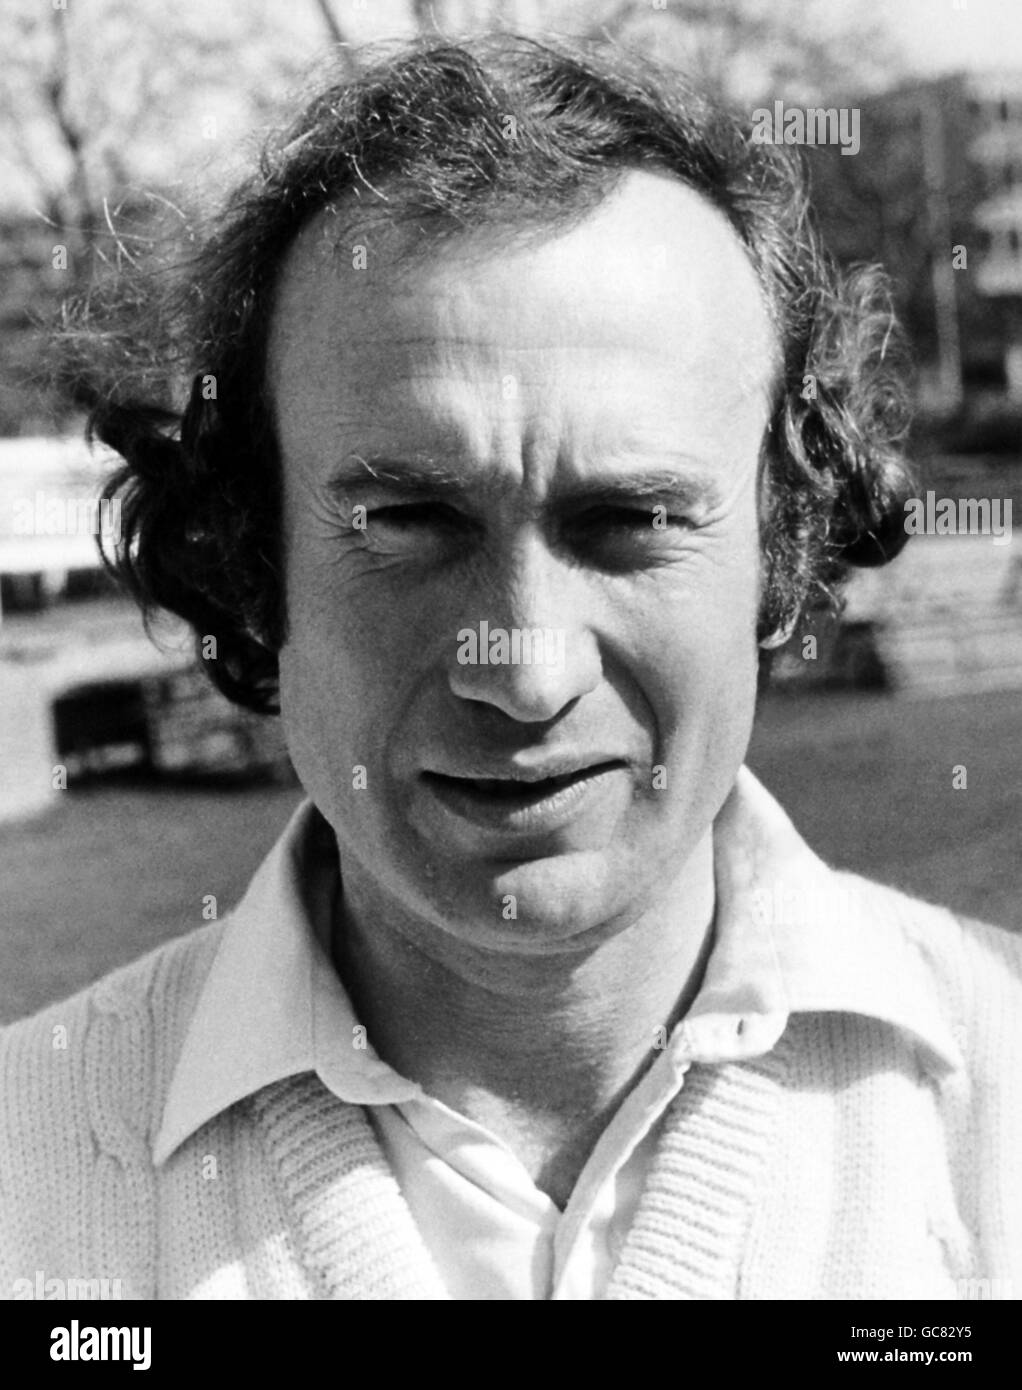 Keith Fletcher, captain of Essex County Cricket Club for 1979. Worcester born, he made his debut for the County in 1962 and was appointed county captain 12 years later. A right hand bat, he has represented England on more than 50 occassions. Stock Photo